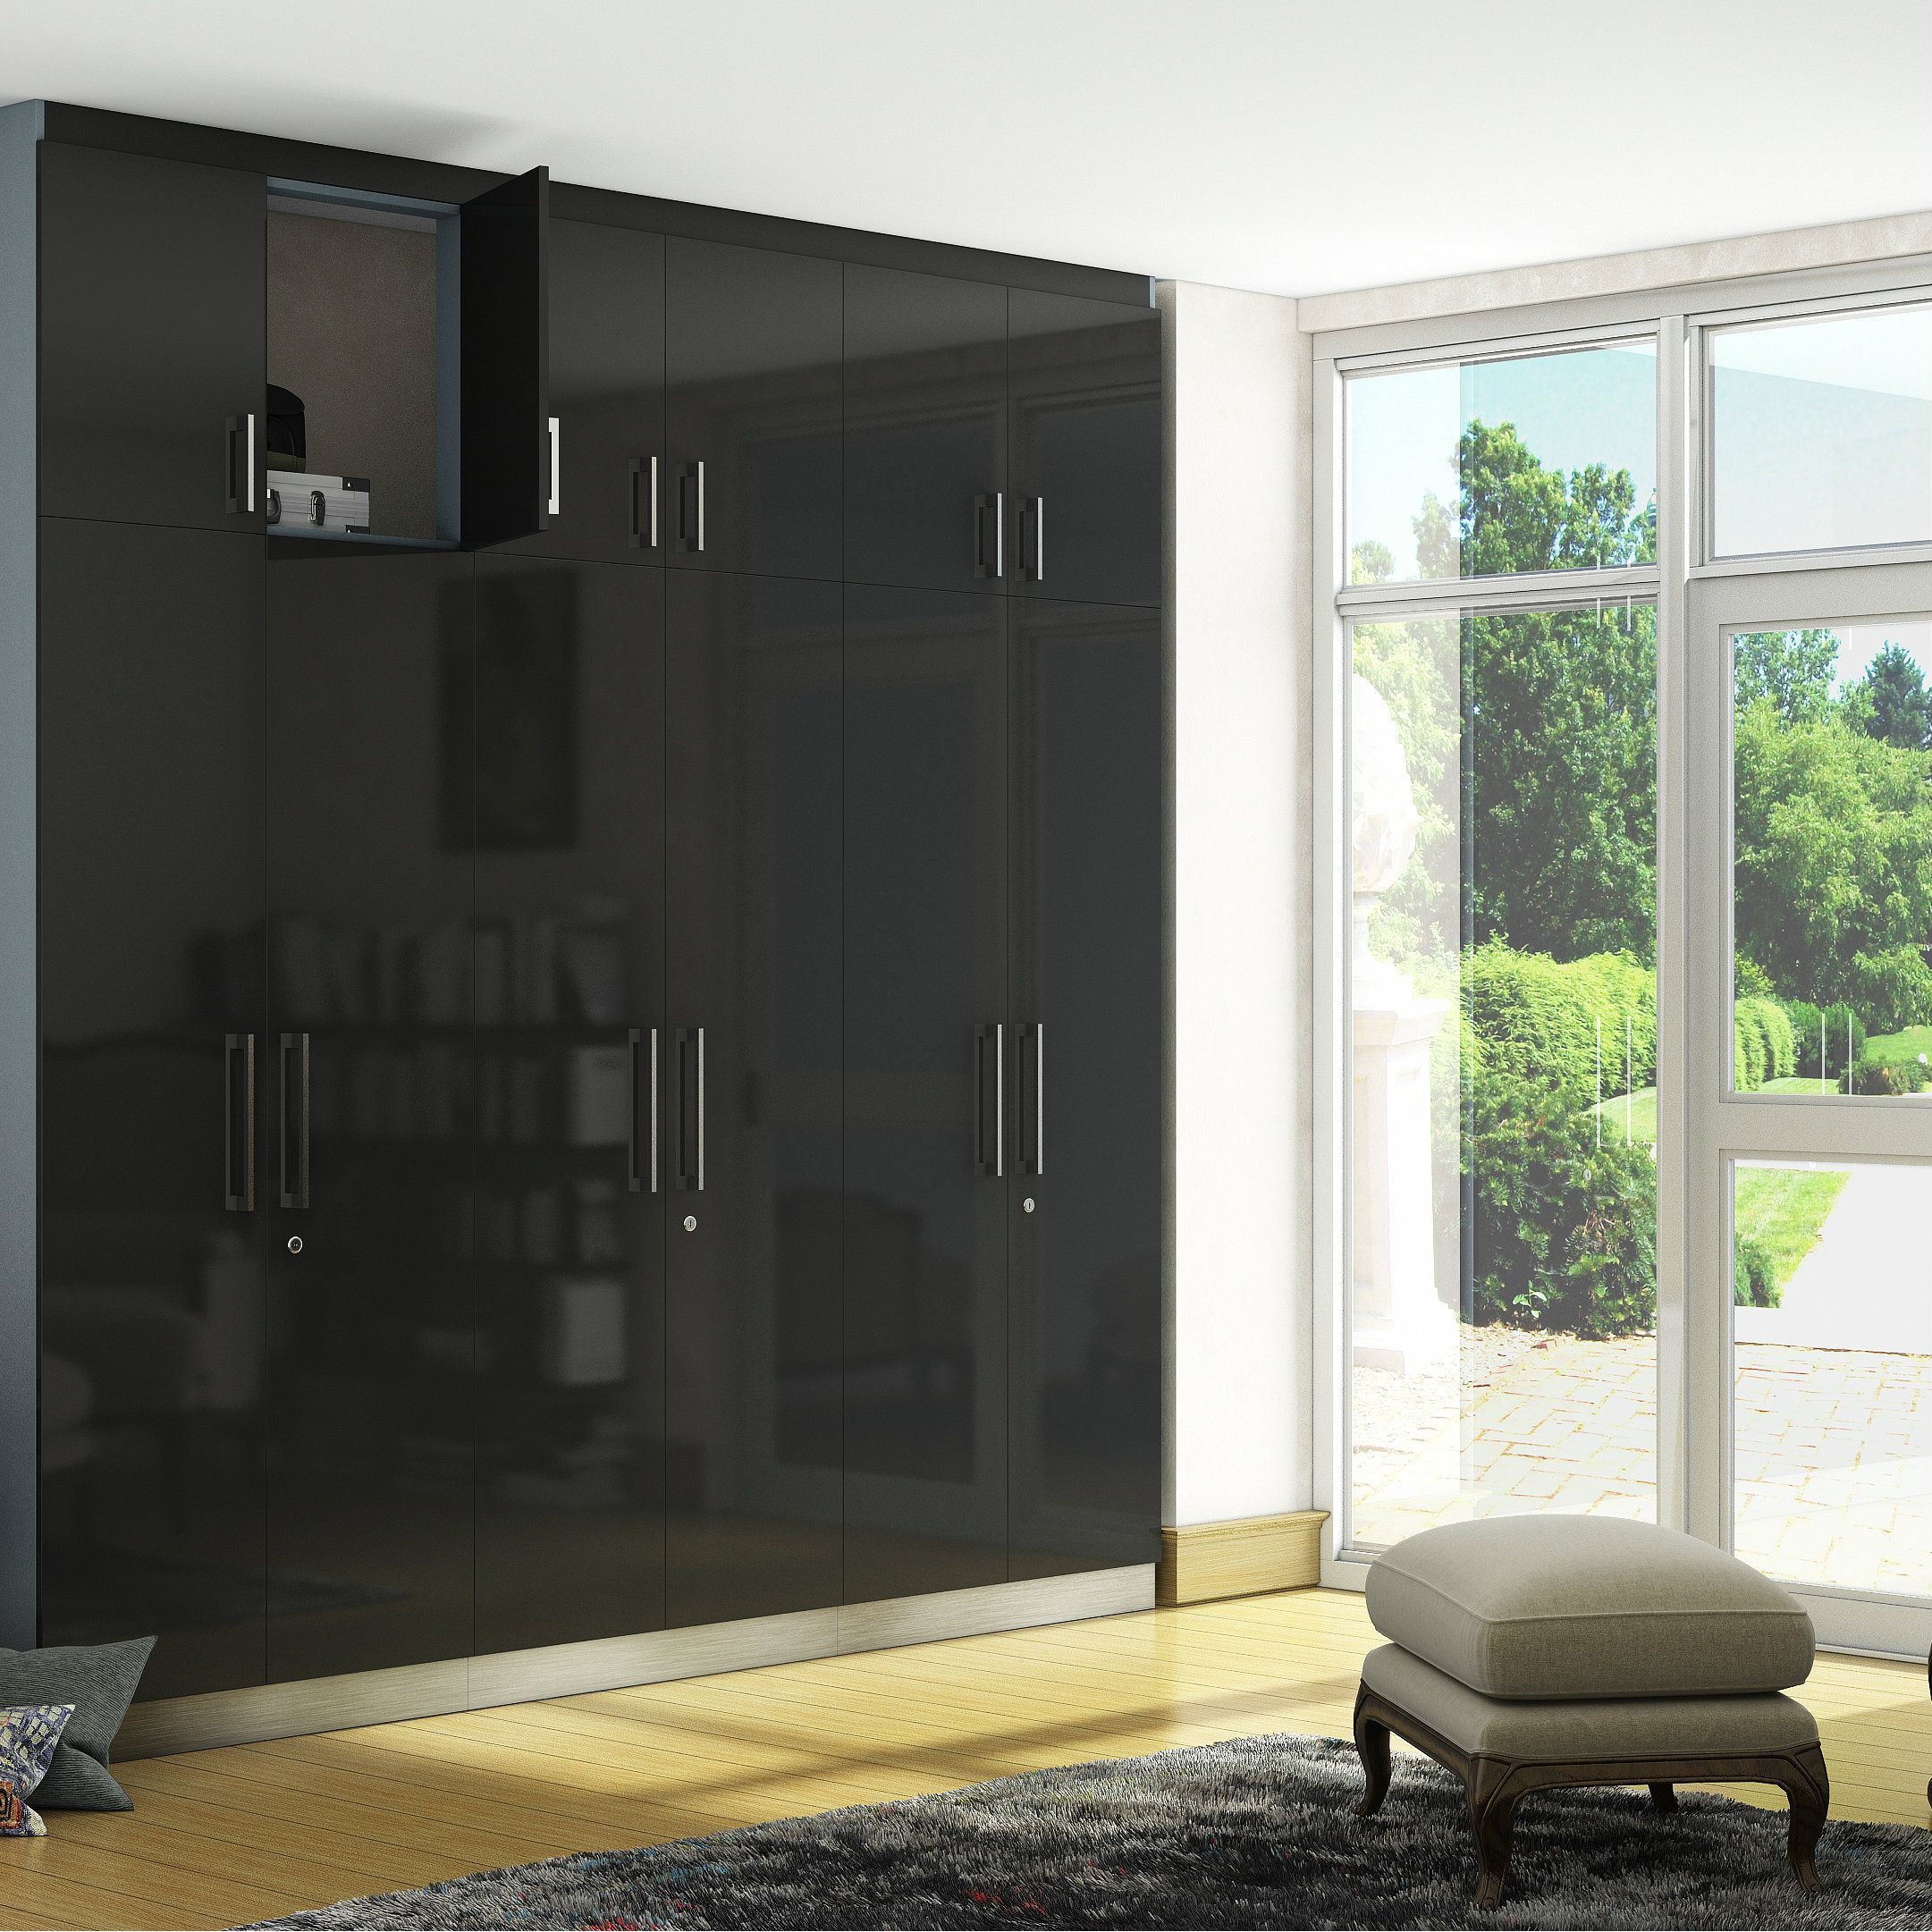 A Glossy Black Wardrobe That Is Every Bit As Impressive And Functional |  Wardrobe Design, Furniture Design, Grey Wardrobe Within Black Shiny Wardrobes (Photo 2 of 15)